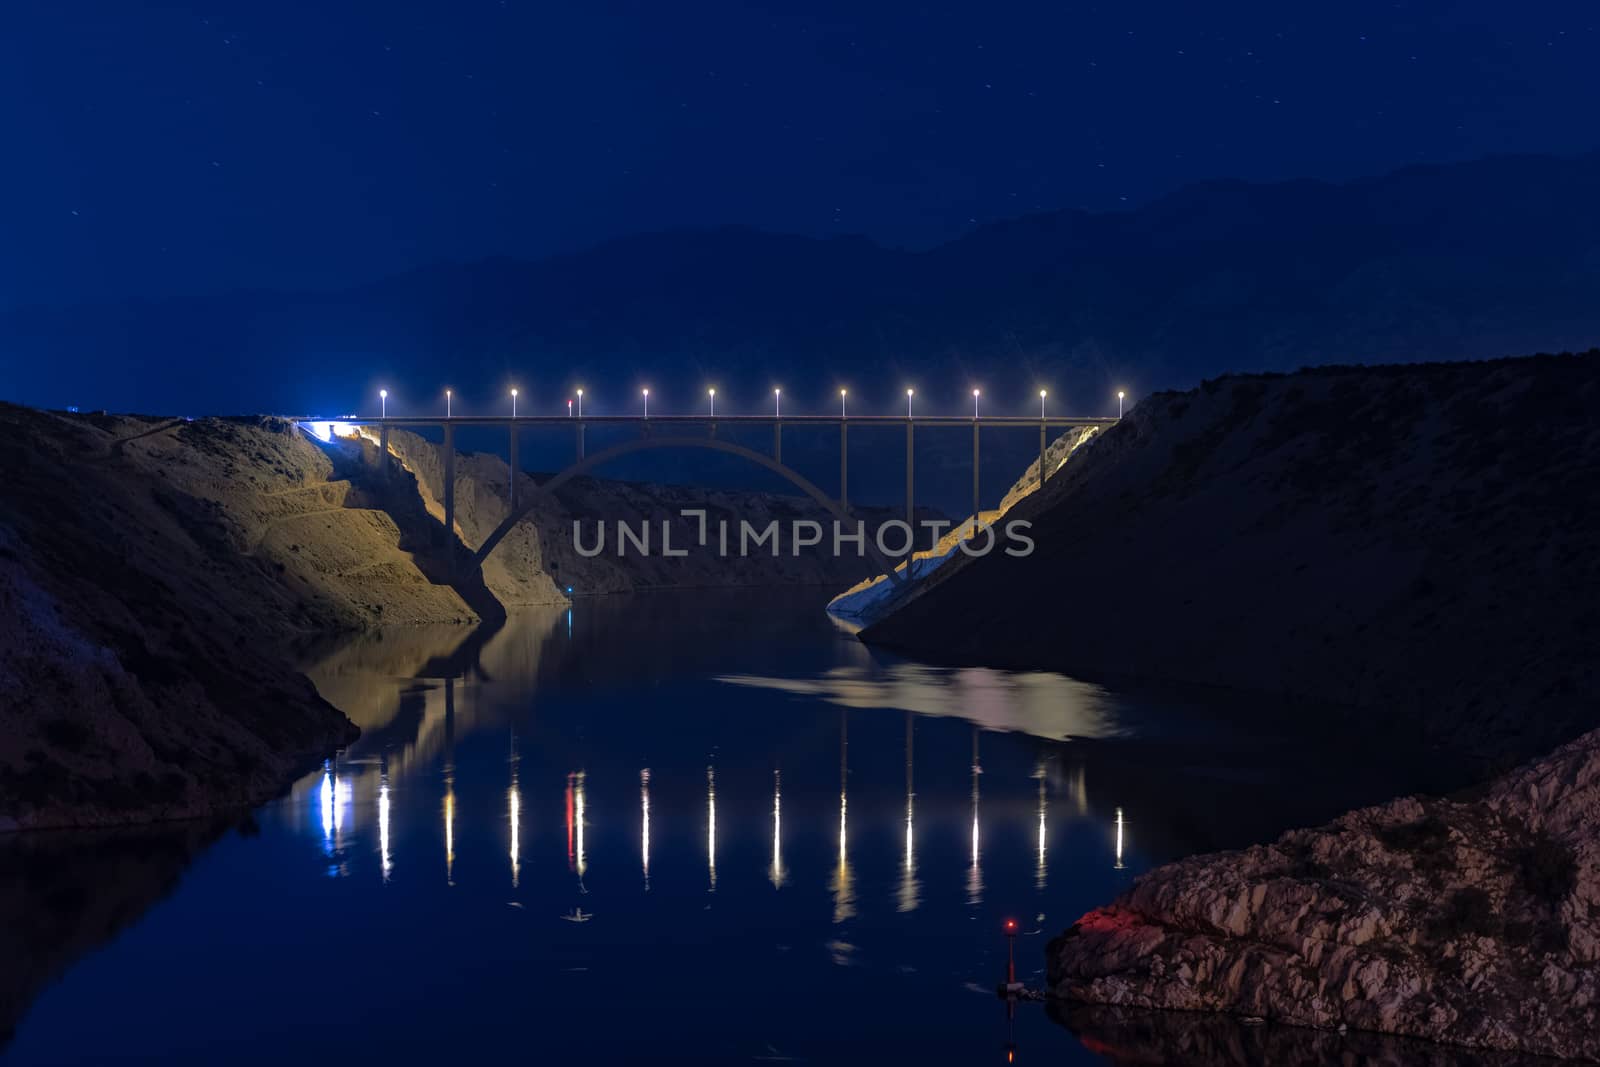 Illuminated highway bridge under stars, reflection of lights in water, mountains in background and bright stars in sky by asafaric